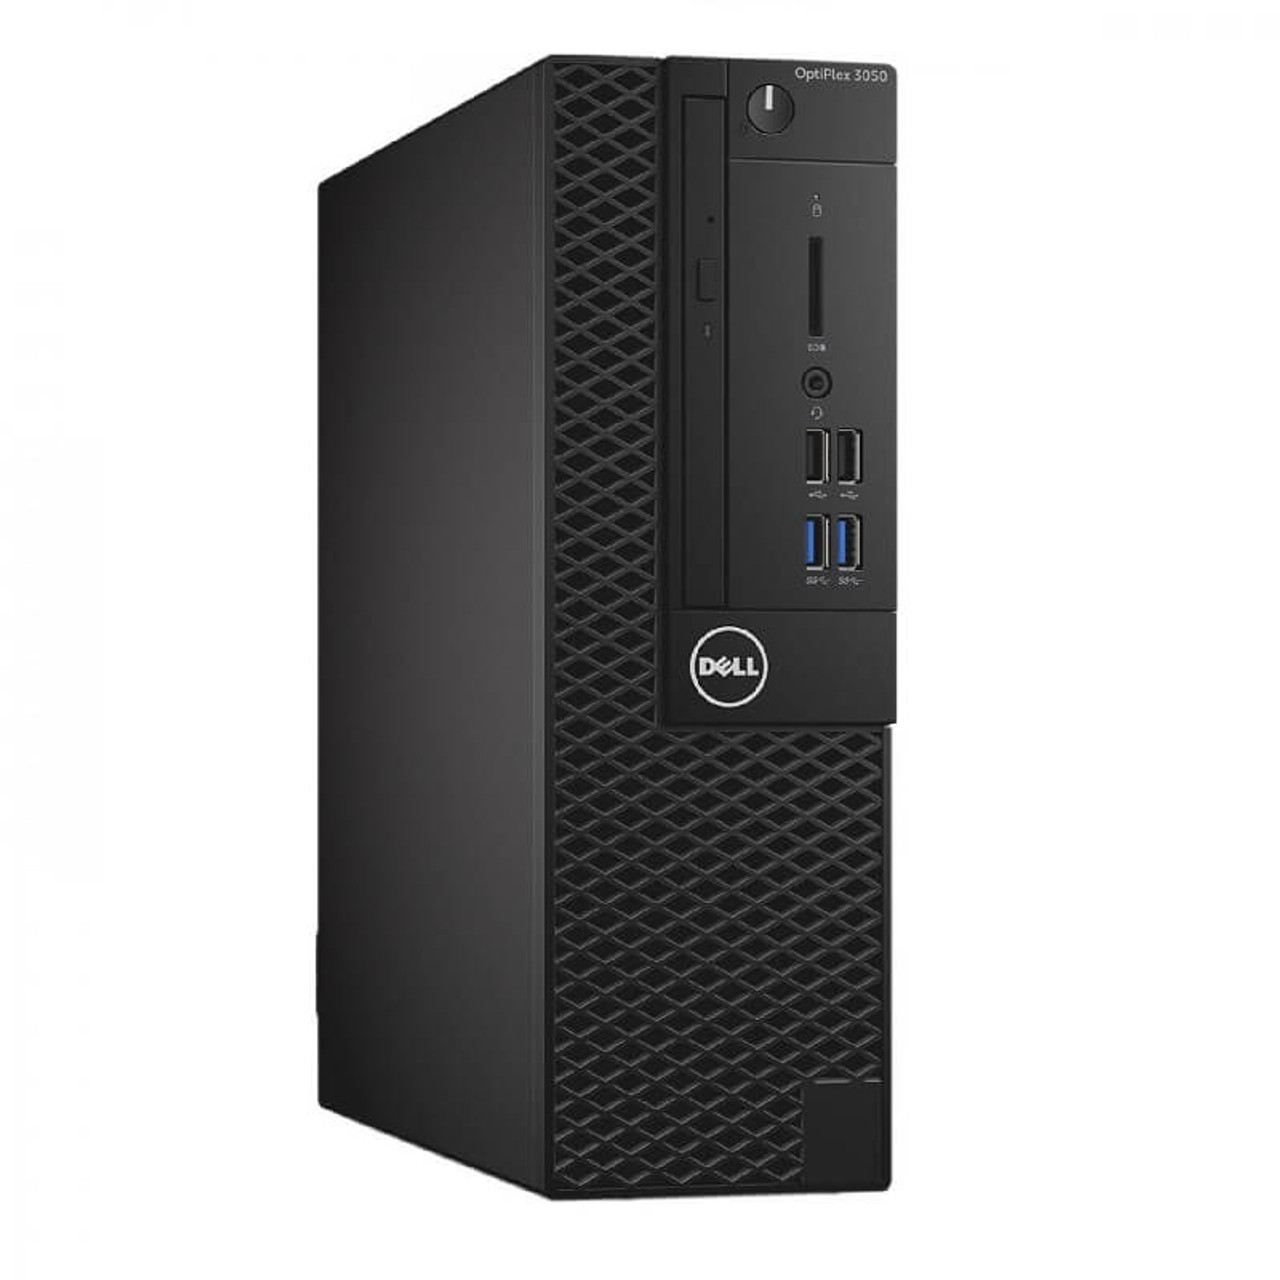 Dell OptiPlex 5050 SFF Intel Core i7-7700 3.6GHz up to 4.2GHz 16GB